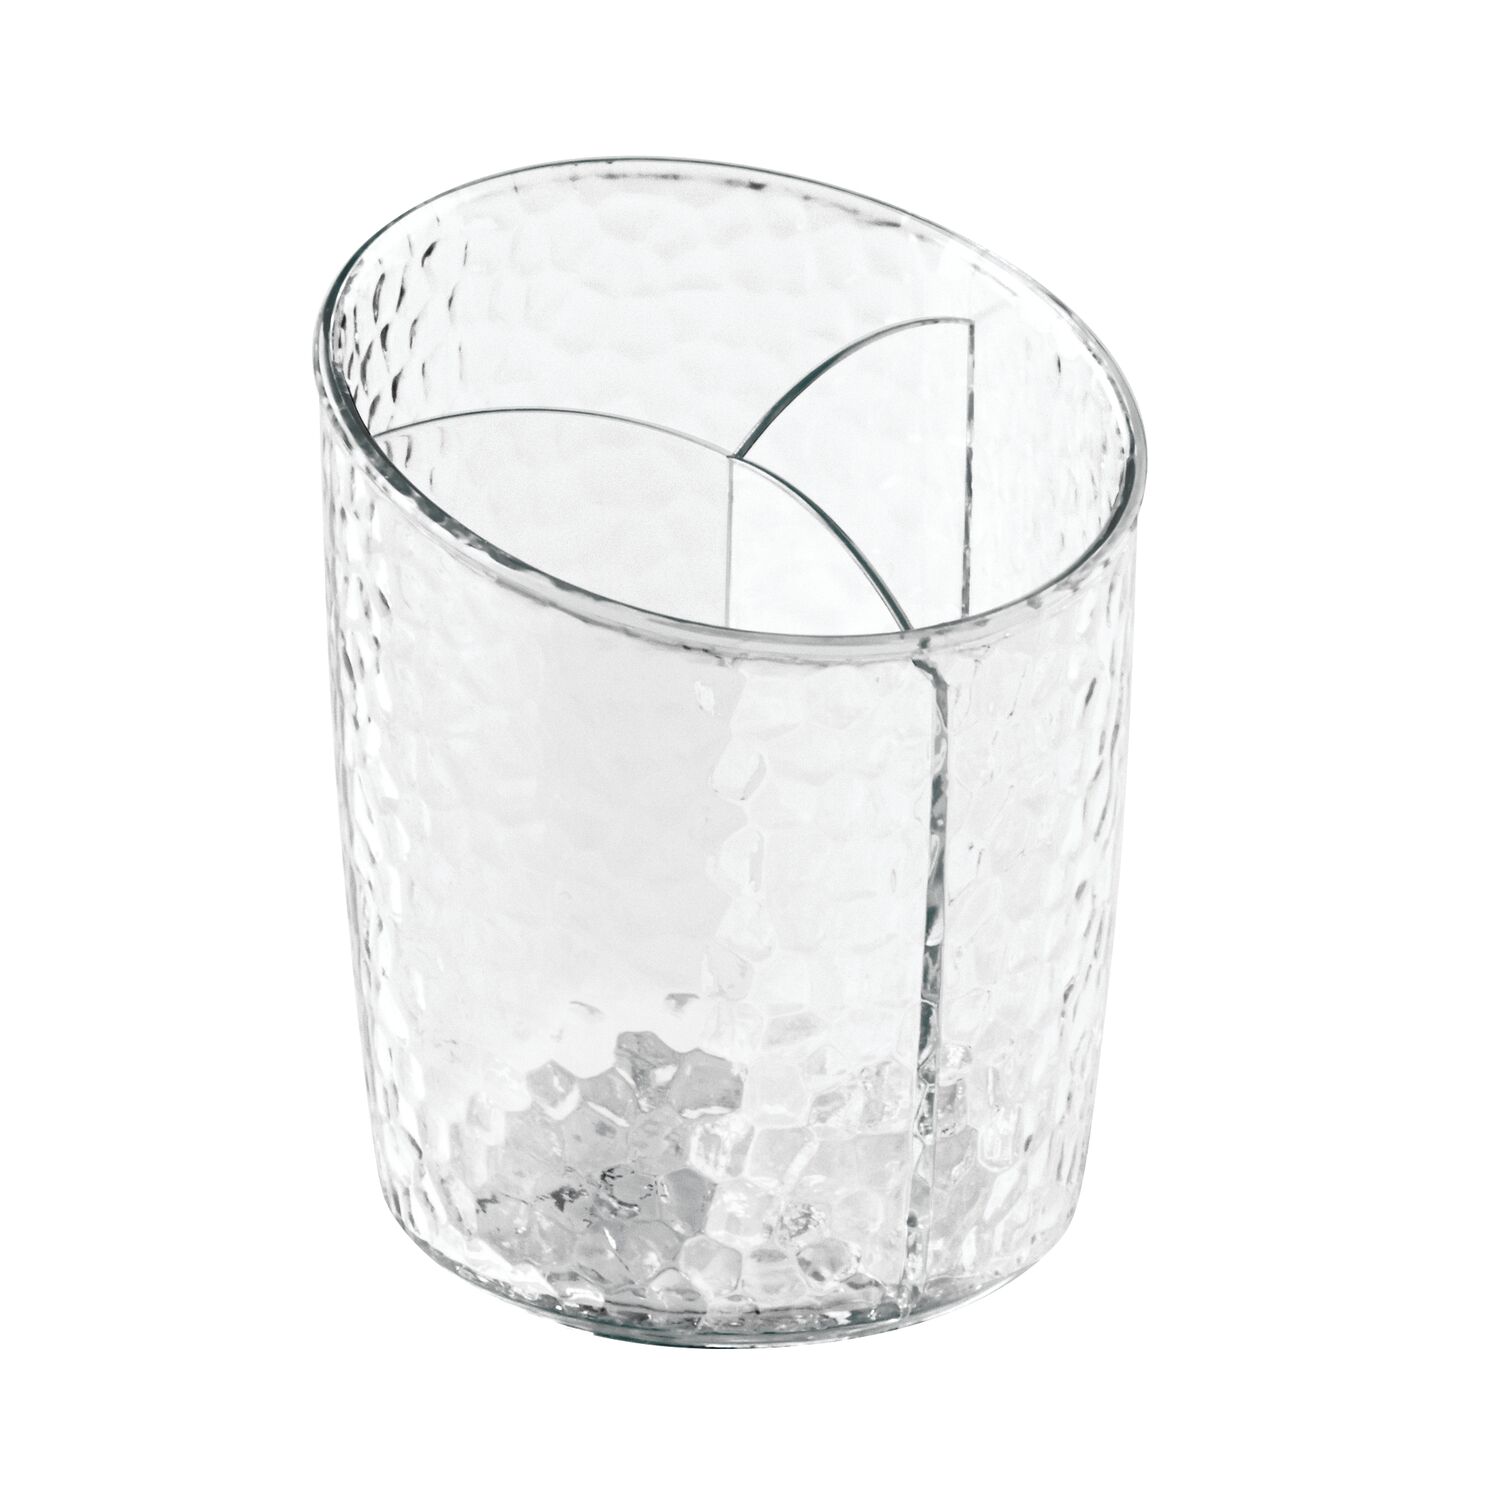 iDesign Clear Cosmetic Tumbler for Bath, Vanity, Cabinet, and Countertop, 3.5" Diameter x 4" H - image 6 of 6